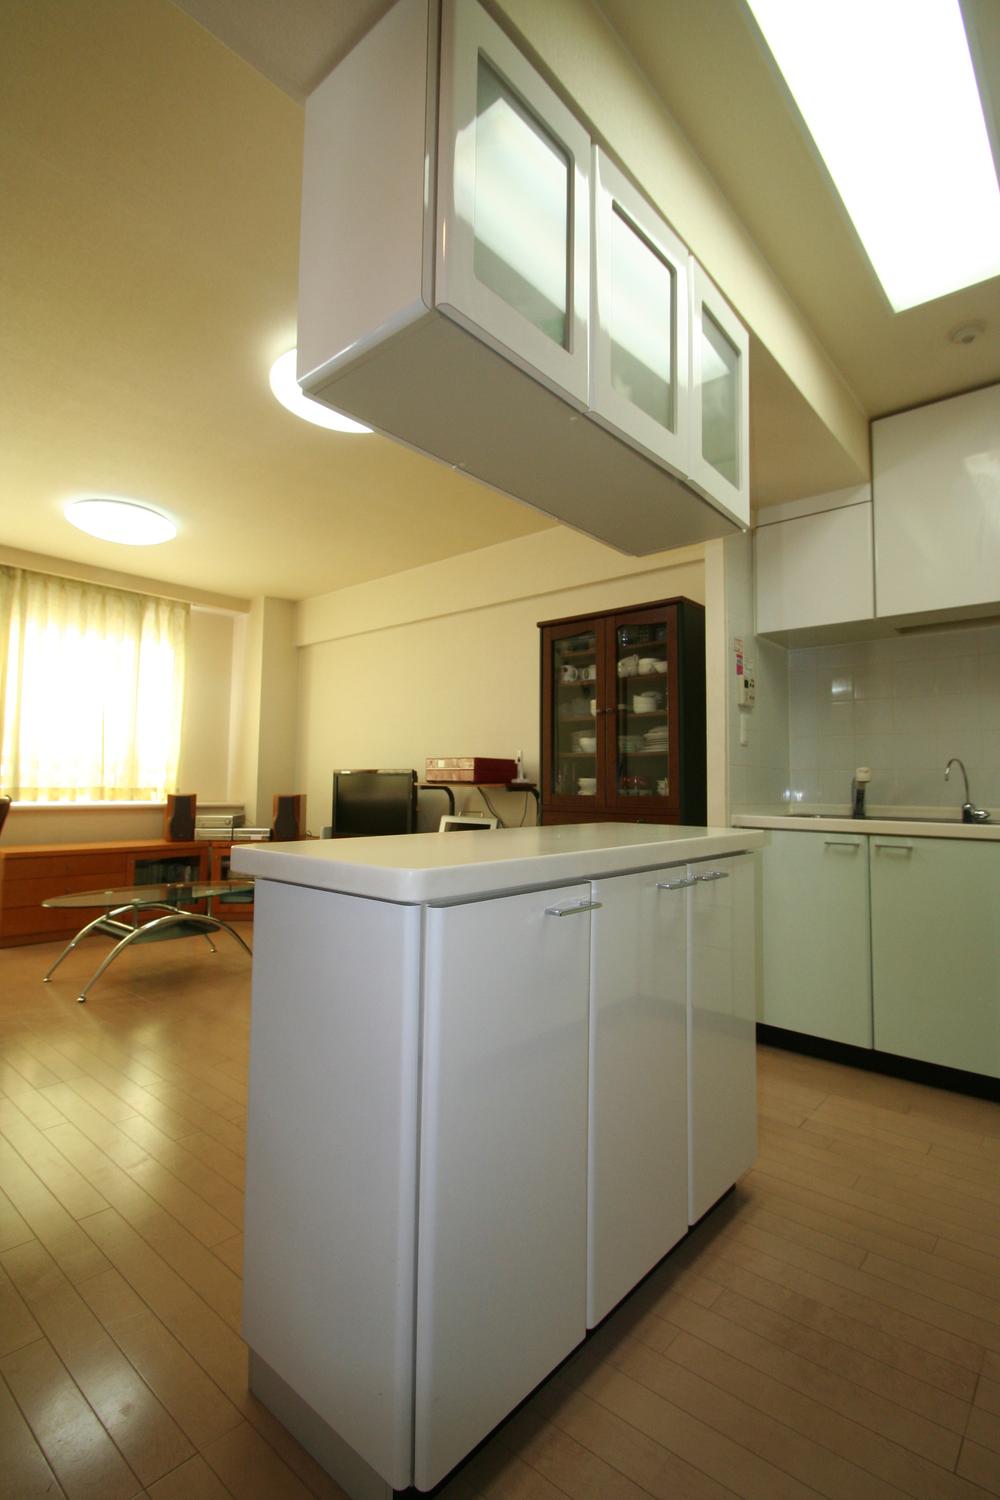 Kitchen. It is storage with Island counter.